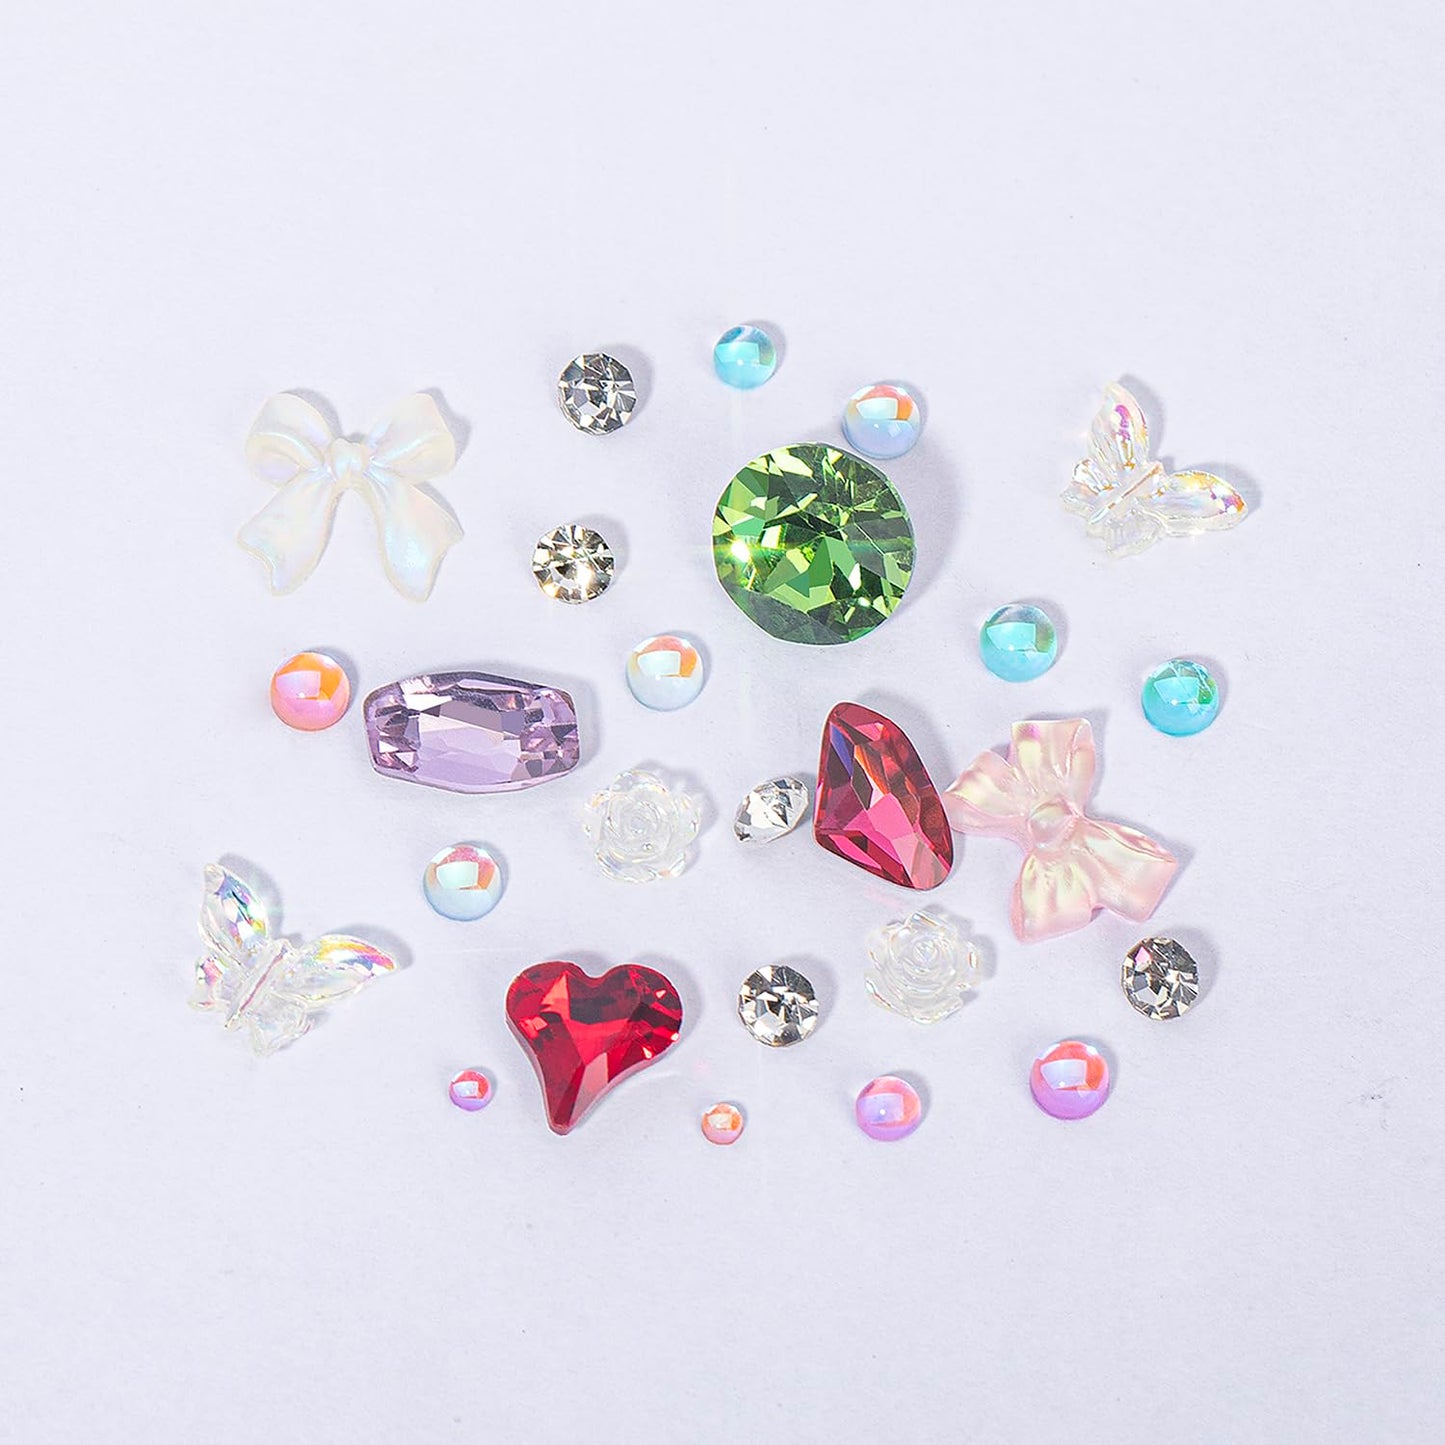 6Boxes 233Pcs Massive Beads Rhinestone Mixed Charms Pink AB Auraro Sparkling Nail Charms Gems Rhinestones Glass Resin Jewelry Flatback Diamonds for Nail Art and Decoration DIY Manicure